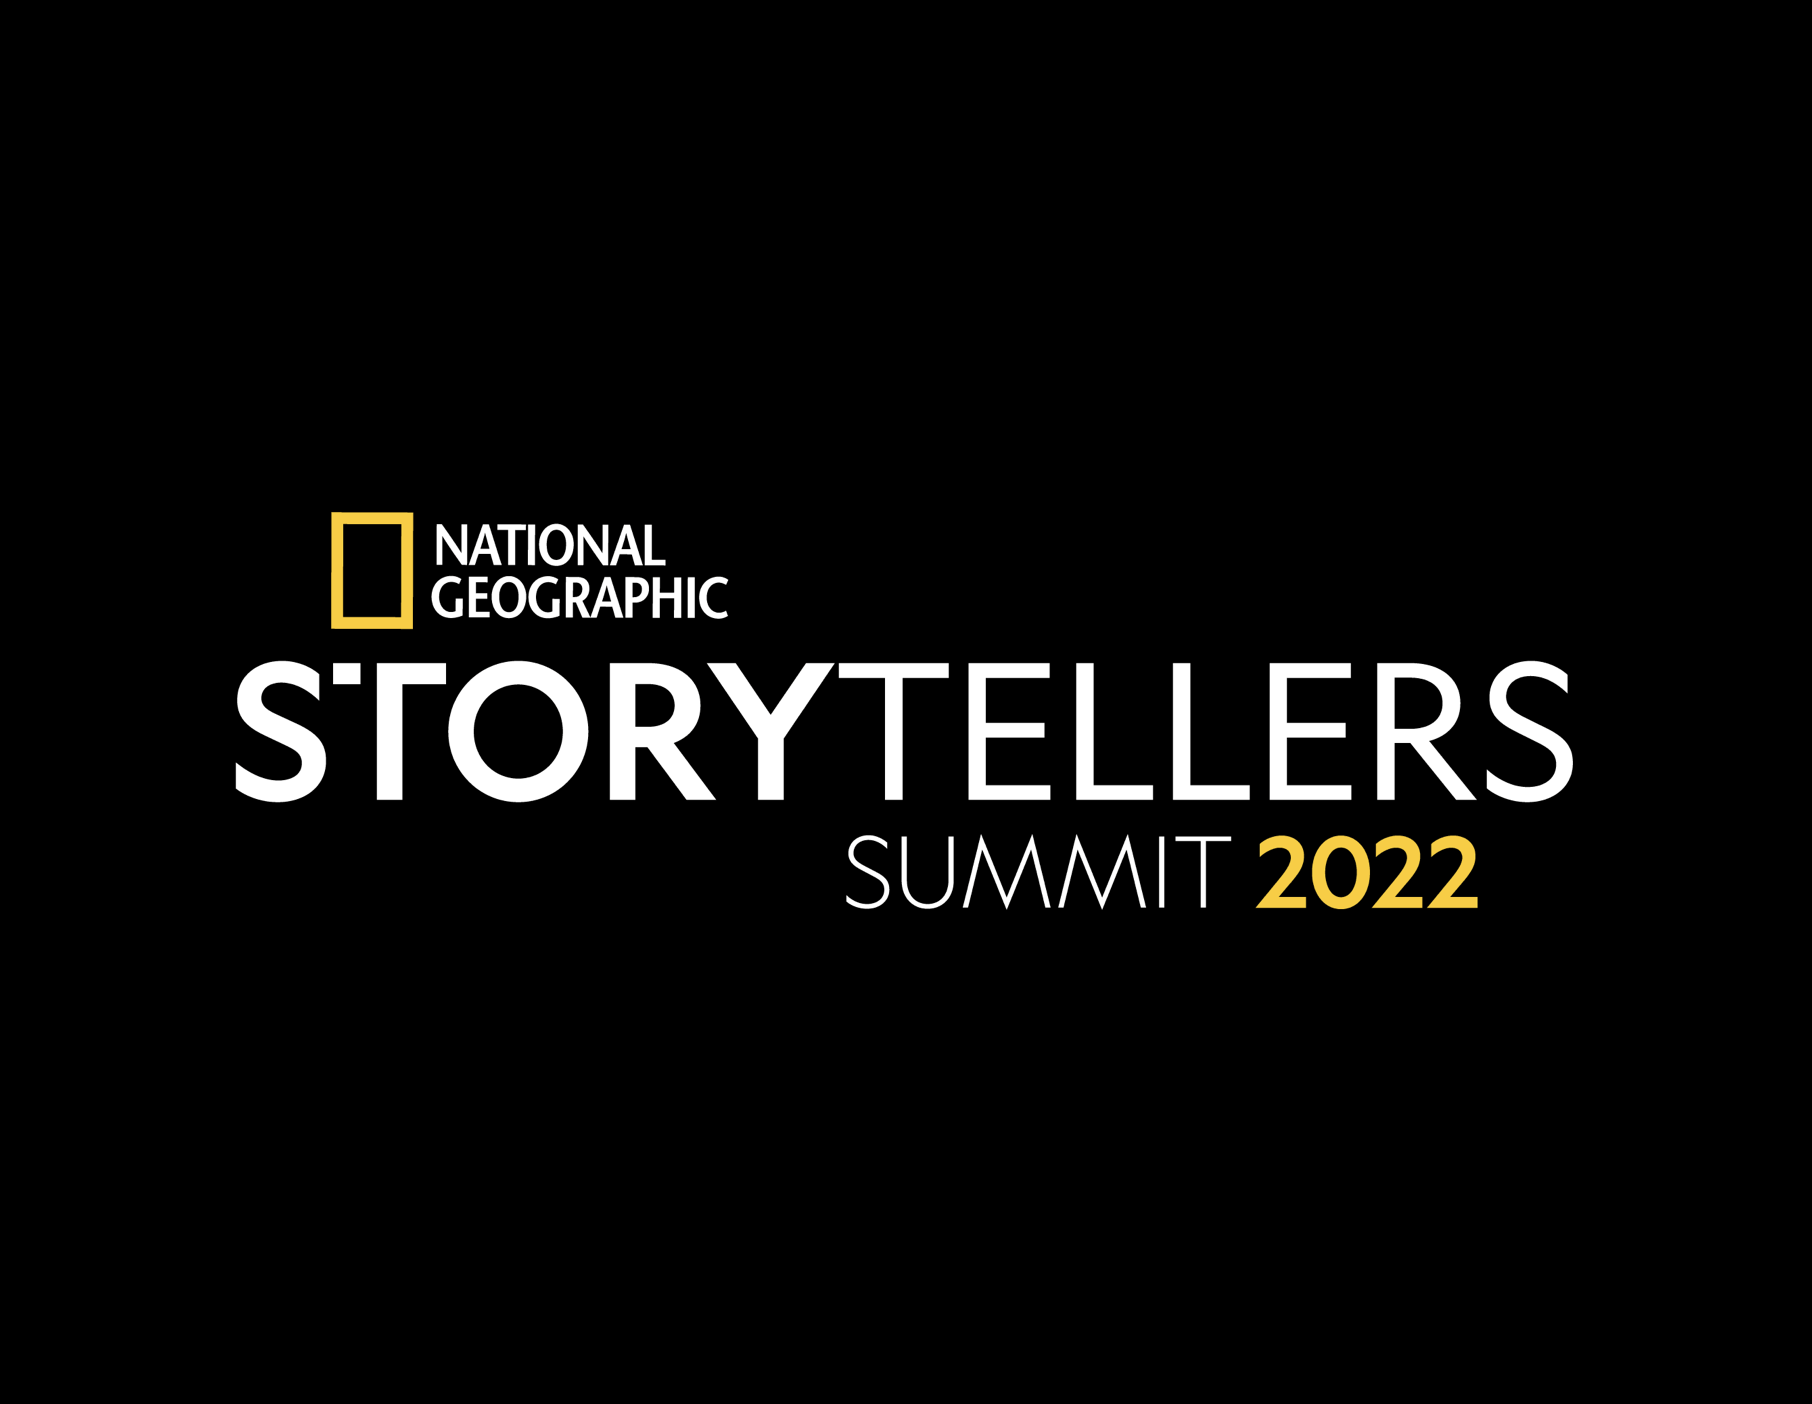 National Geographic STORYTELLERS Summit 2022